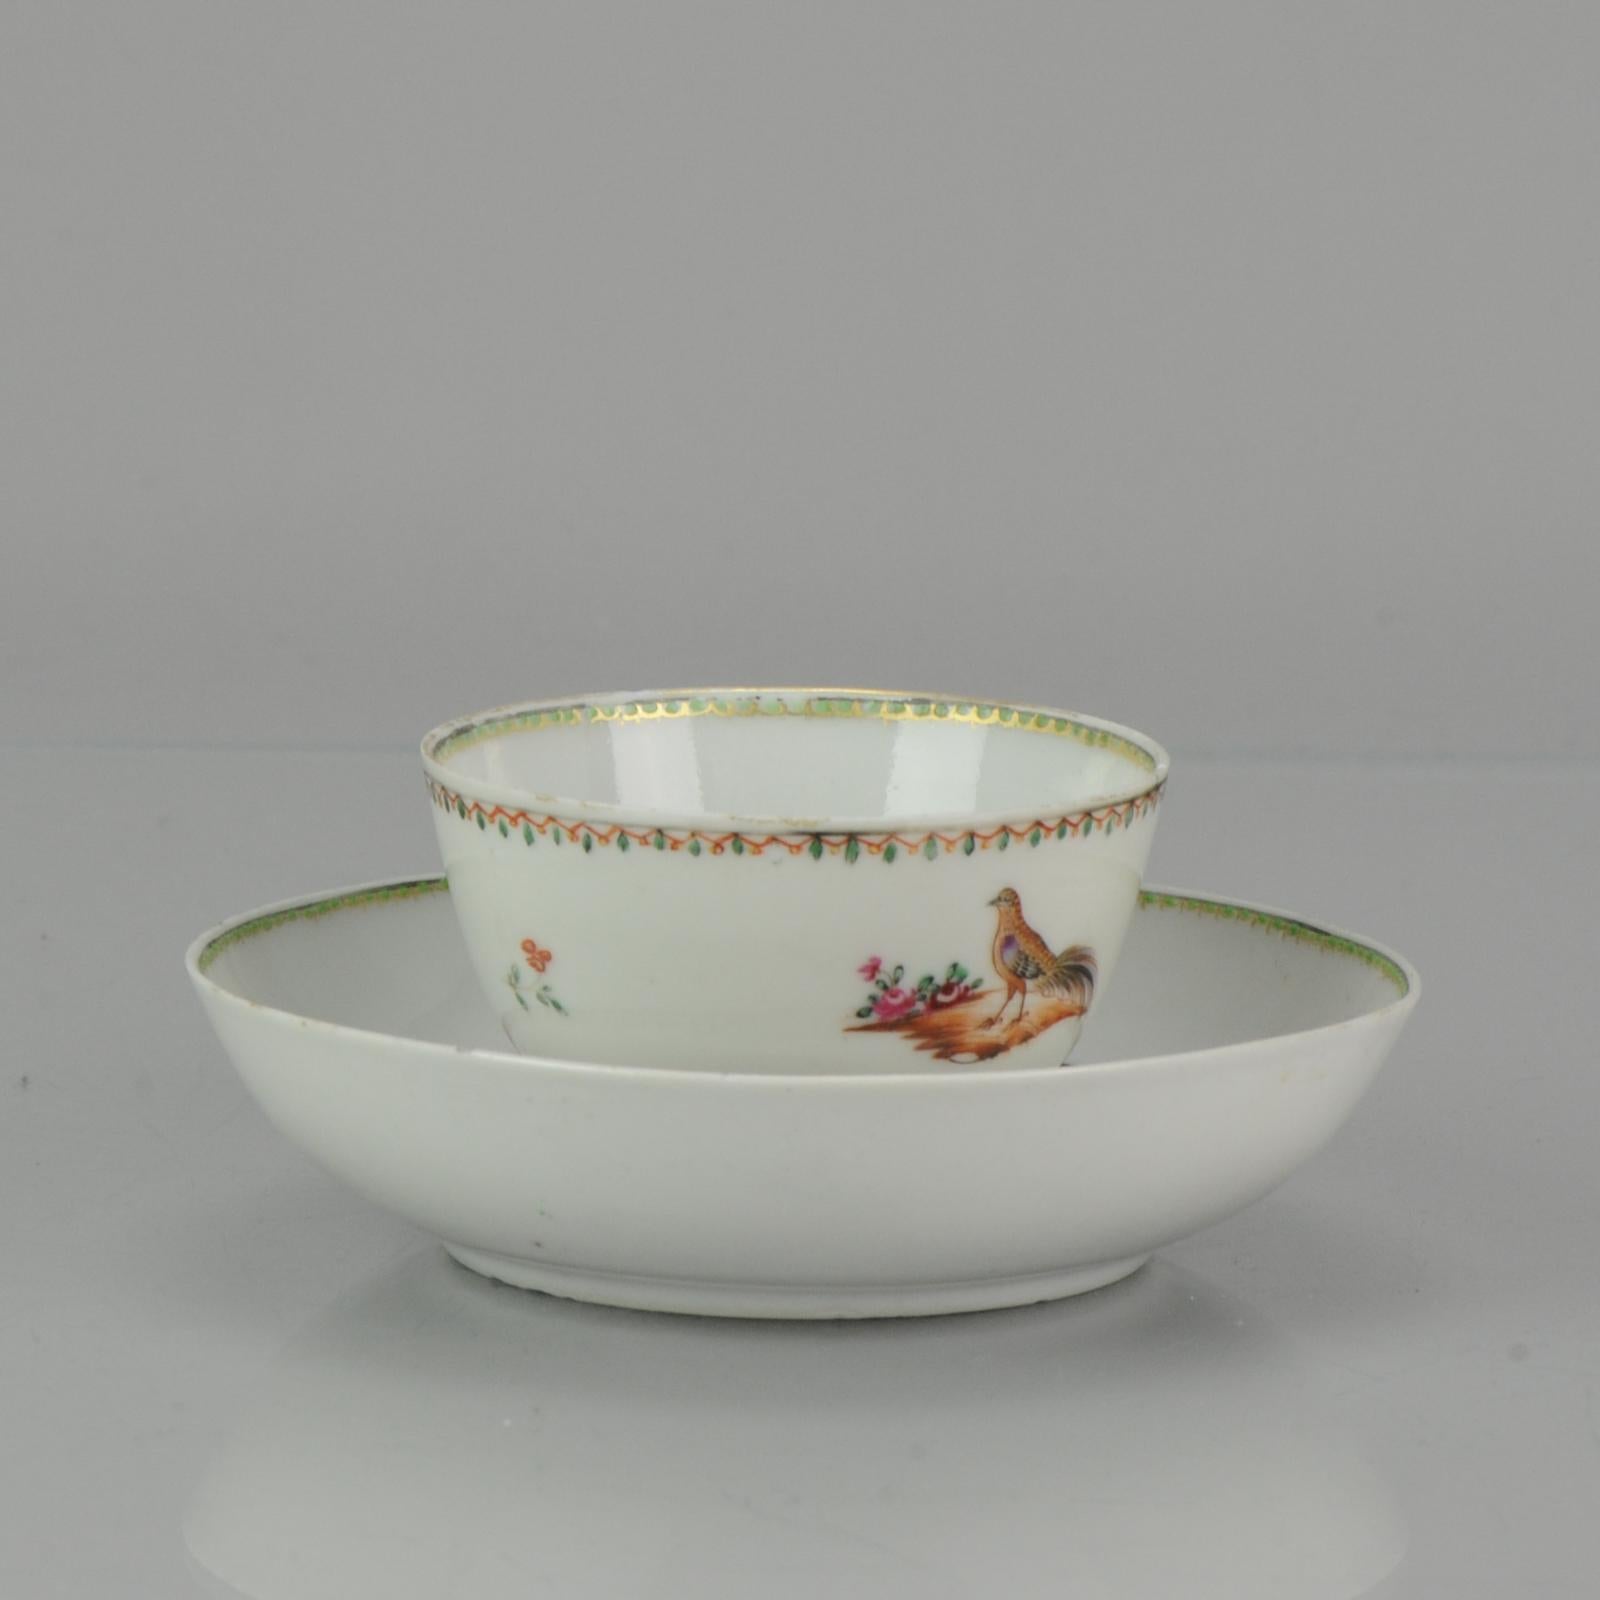 Antique Chinese Porcelain Famille Rose Qianlong Bird Tea Bowl China, 18th Cen In Good Condition For Sale In Amsterdam, Noord Holland